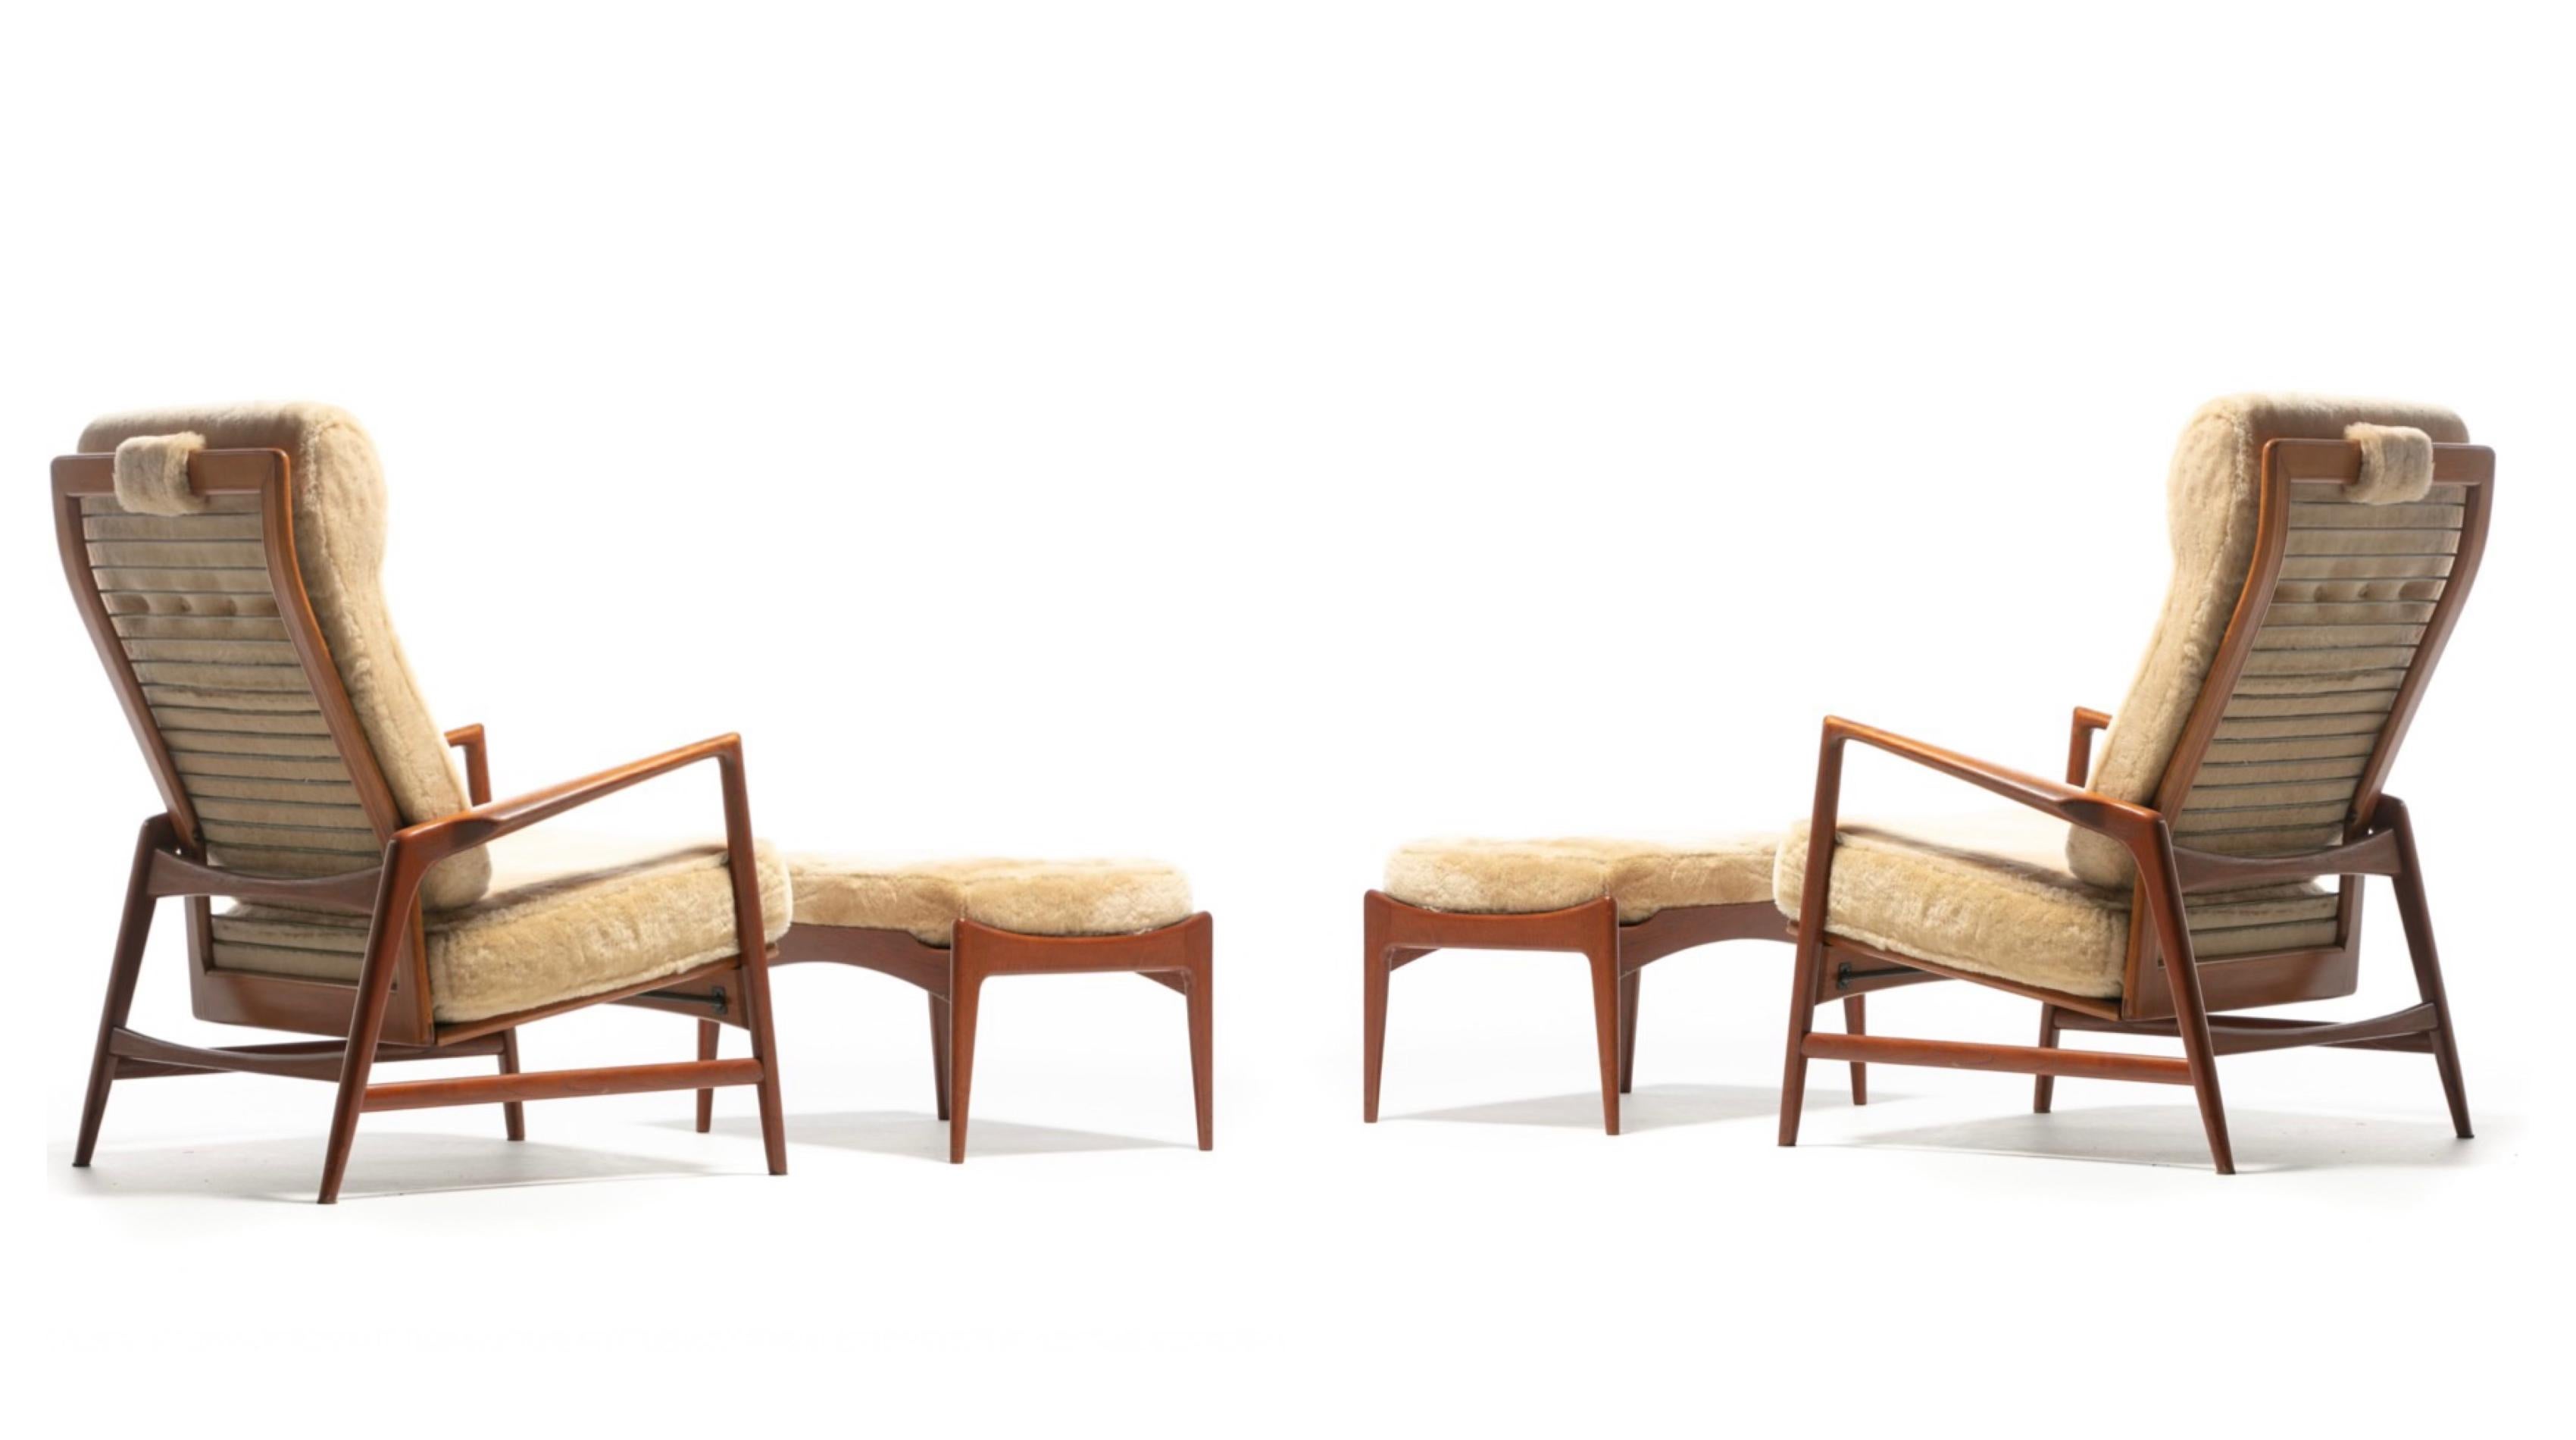 One of a kind pair of beautiful reclining lounge chairs and ottomans designed by Ib Kofod-Larsen for Selig freshly upholstered in hand sewn rich Oatmeal / Ivory Shearling. An early Mid Century Scandinavian Modern design hailing from 1950s Sweden,